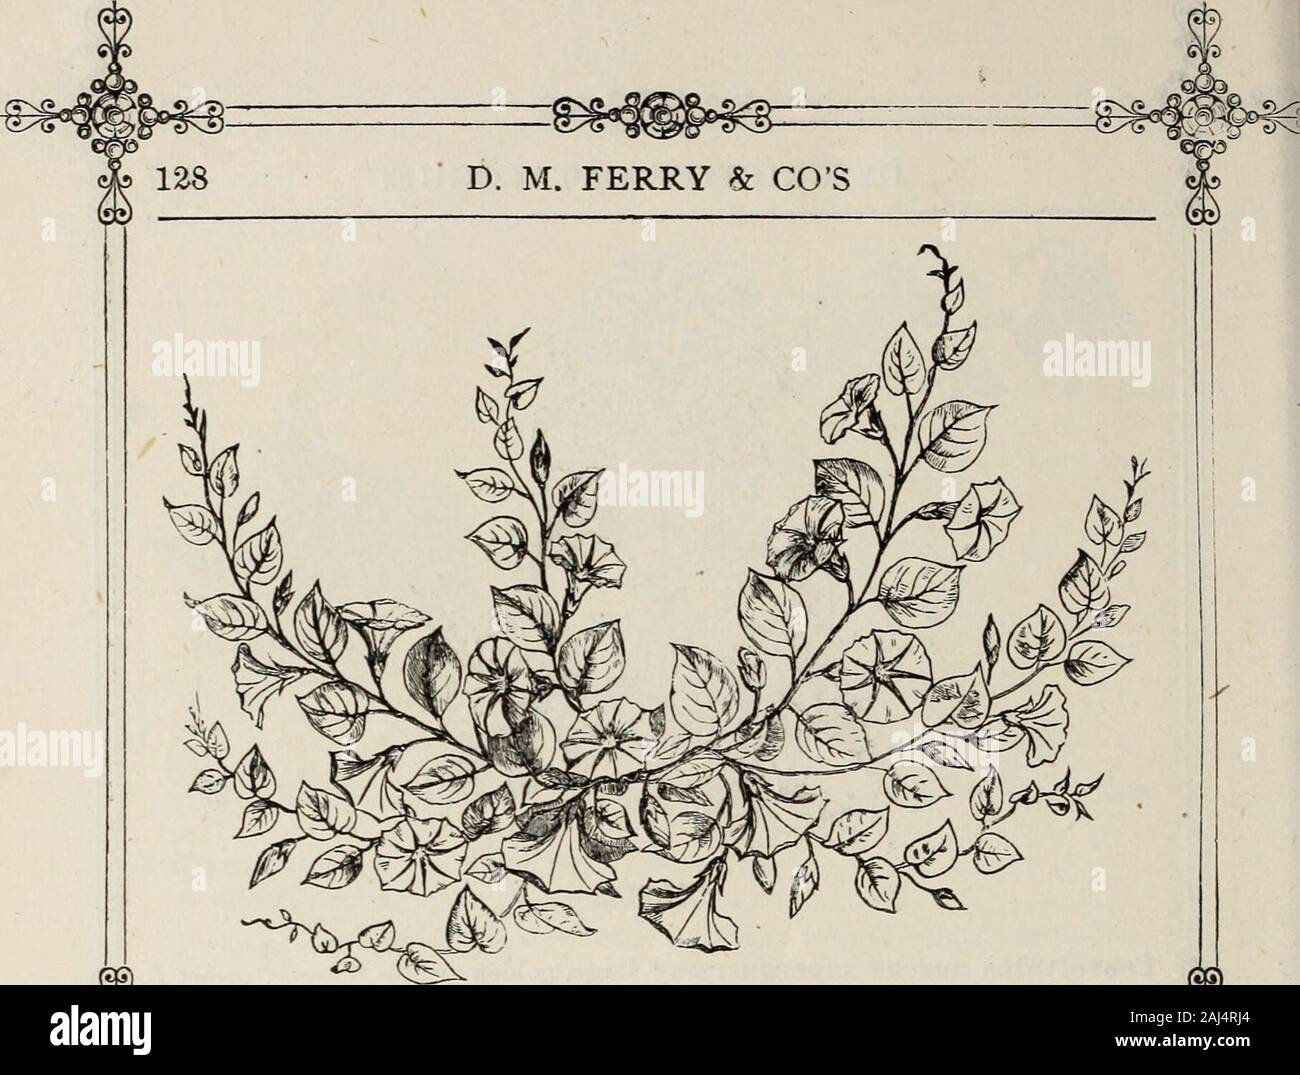 D M Ferry & Co's seed annual 1875 . CONVOLVULUS, Mauritanicus. habit. Sow in the Spring, and thin out the plants. In bloom from July to November. Crepis barbata, yellow, with purple eye. rubra, bright red. * flore aibo, white. mixed, seeds of the above varieties mixed. CUCURBITA. (See Gourds.1 CUPHEA. An ornamental and very beautiful family of profuse-blooming plants, to betreated same as Verbenas. Half-hardy perennial.Cnphea silenoides, dark crimson-brown ; fine. Ziliipanii) large, violet-red flowers . splendid. mixed) seeds of the above varieties mixed. CYCLAMEN Well known and universally ad Stock Photo